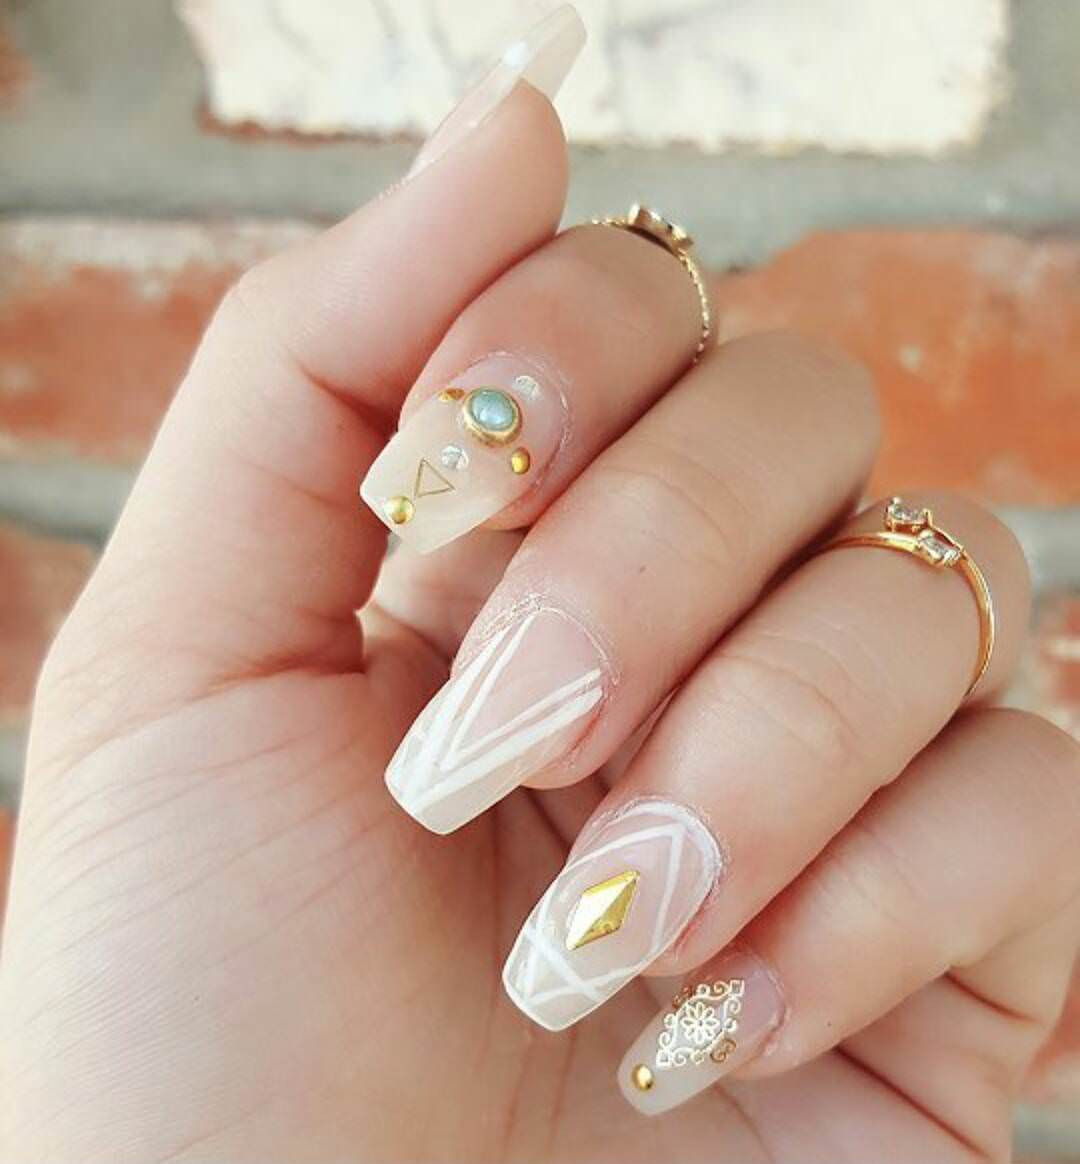 Nail Styles For Prom
 27 Prom Nail Art Designs ideas